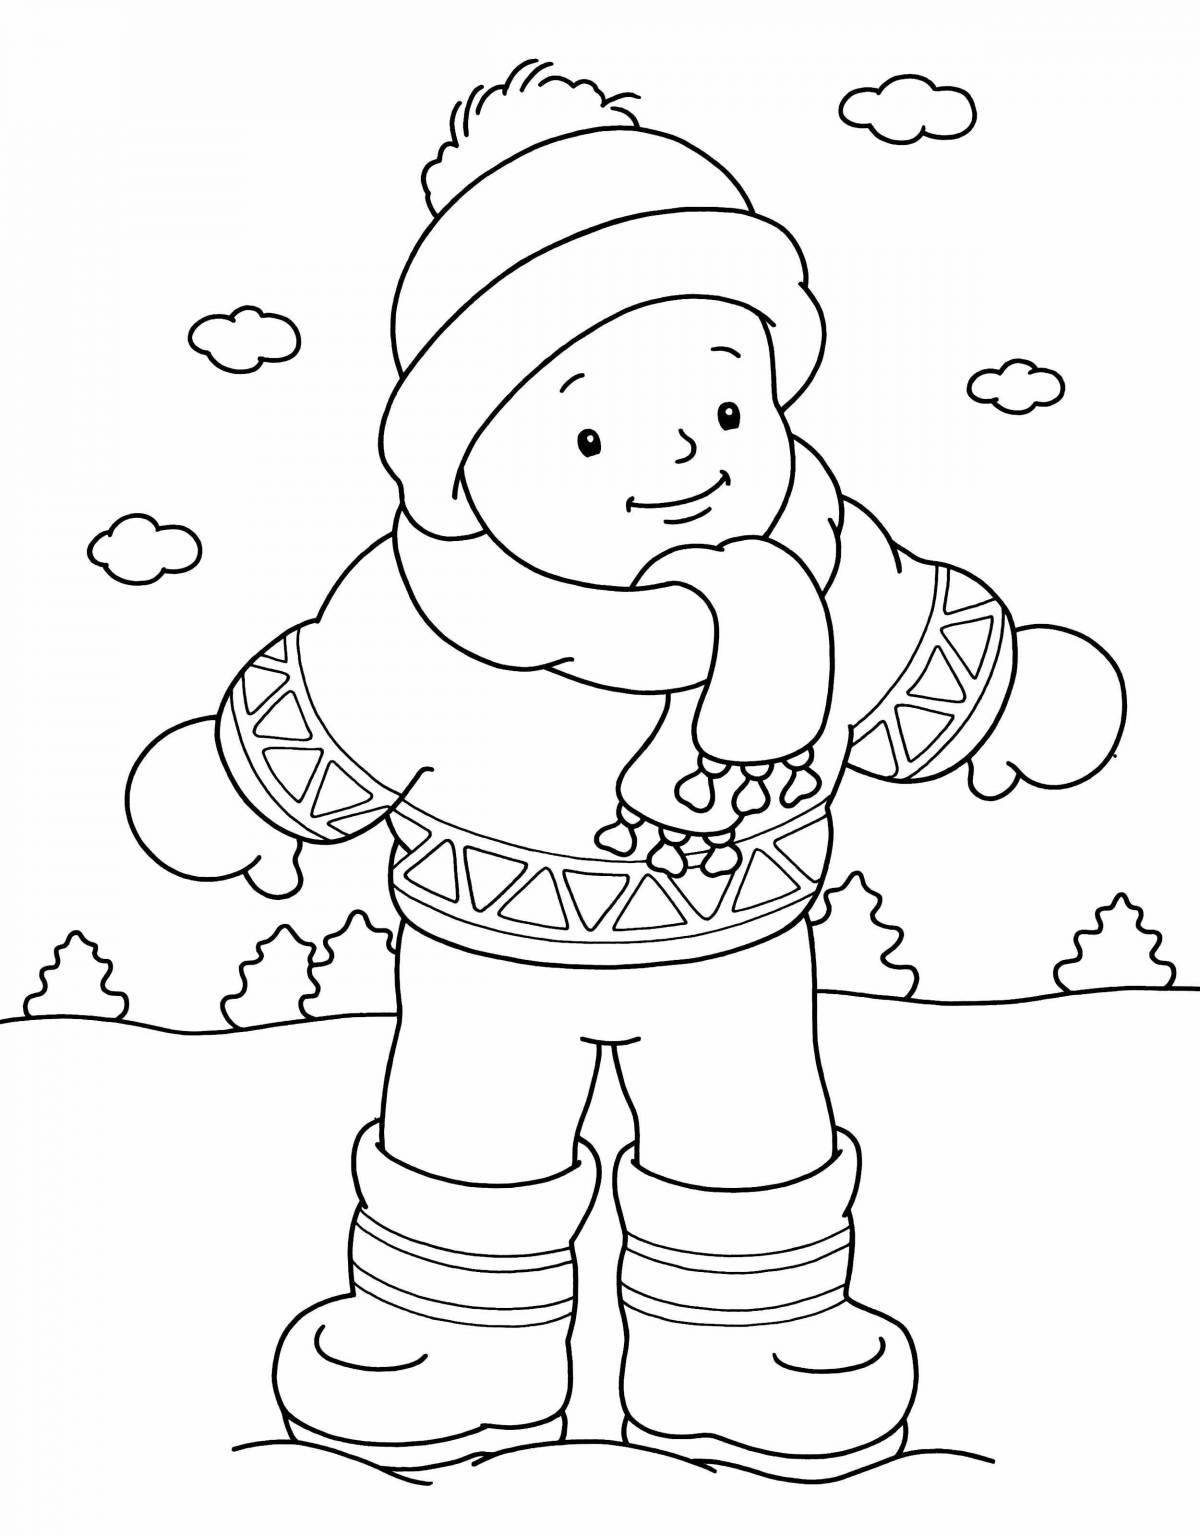 Color-frenzy preschool winter clothes coloring page